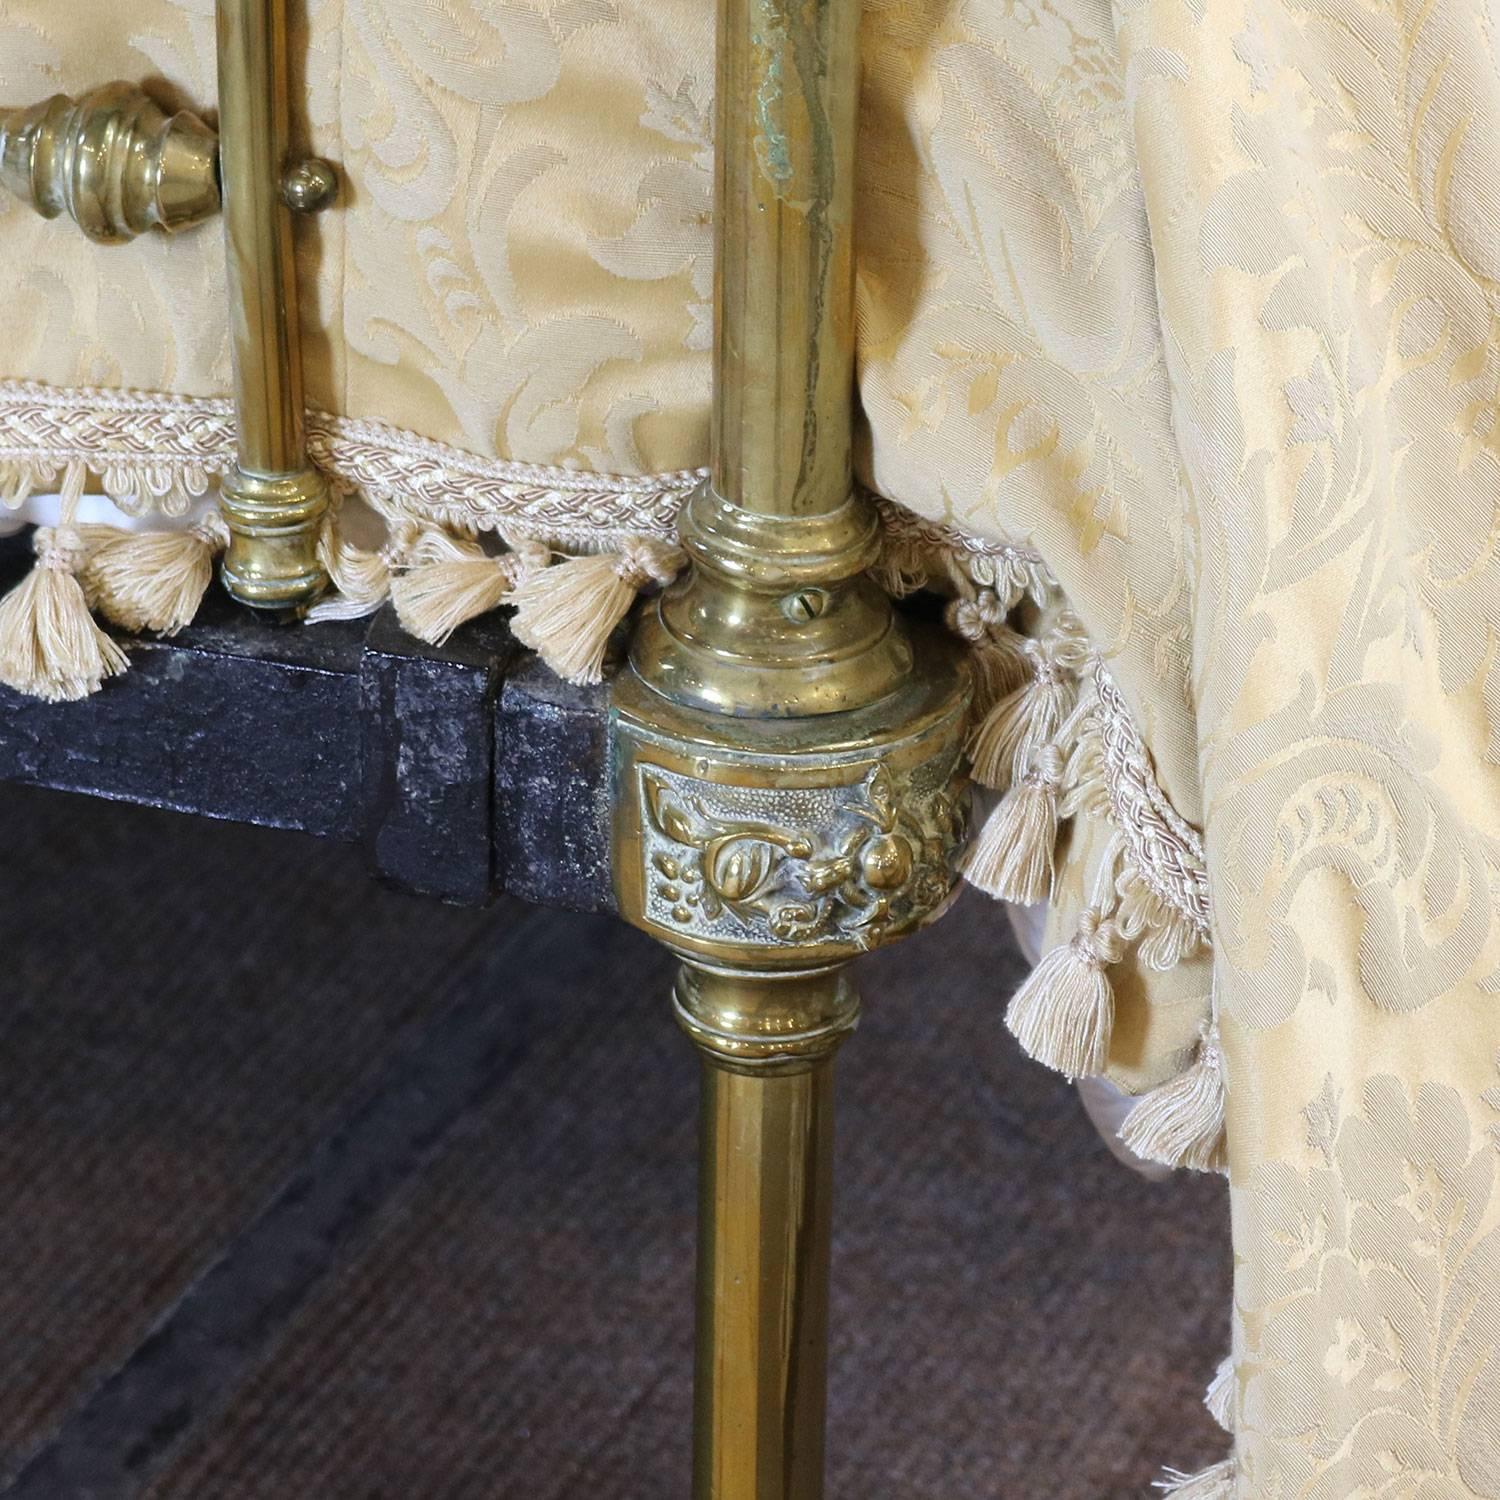 19th Century Brass Bedstead with Decorative Fittings